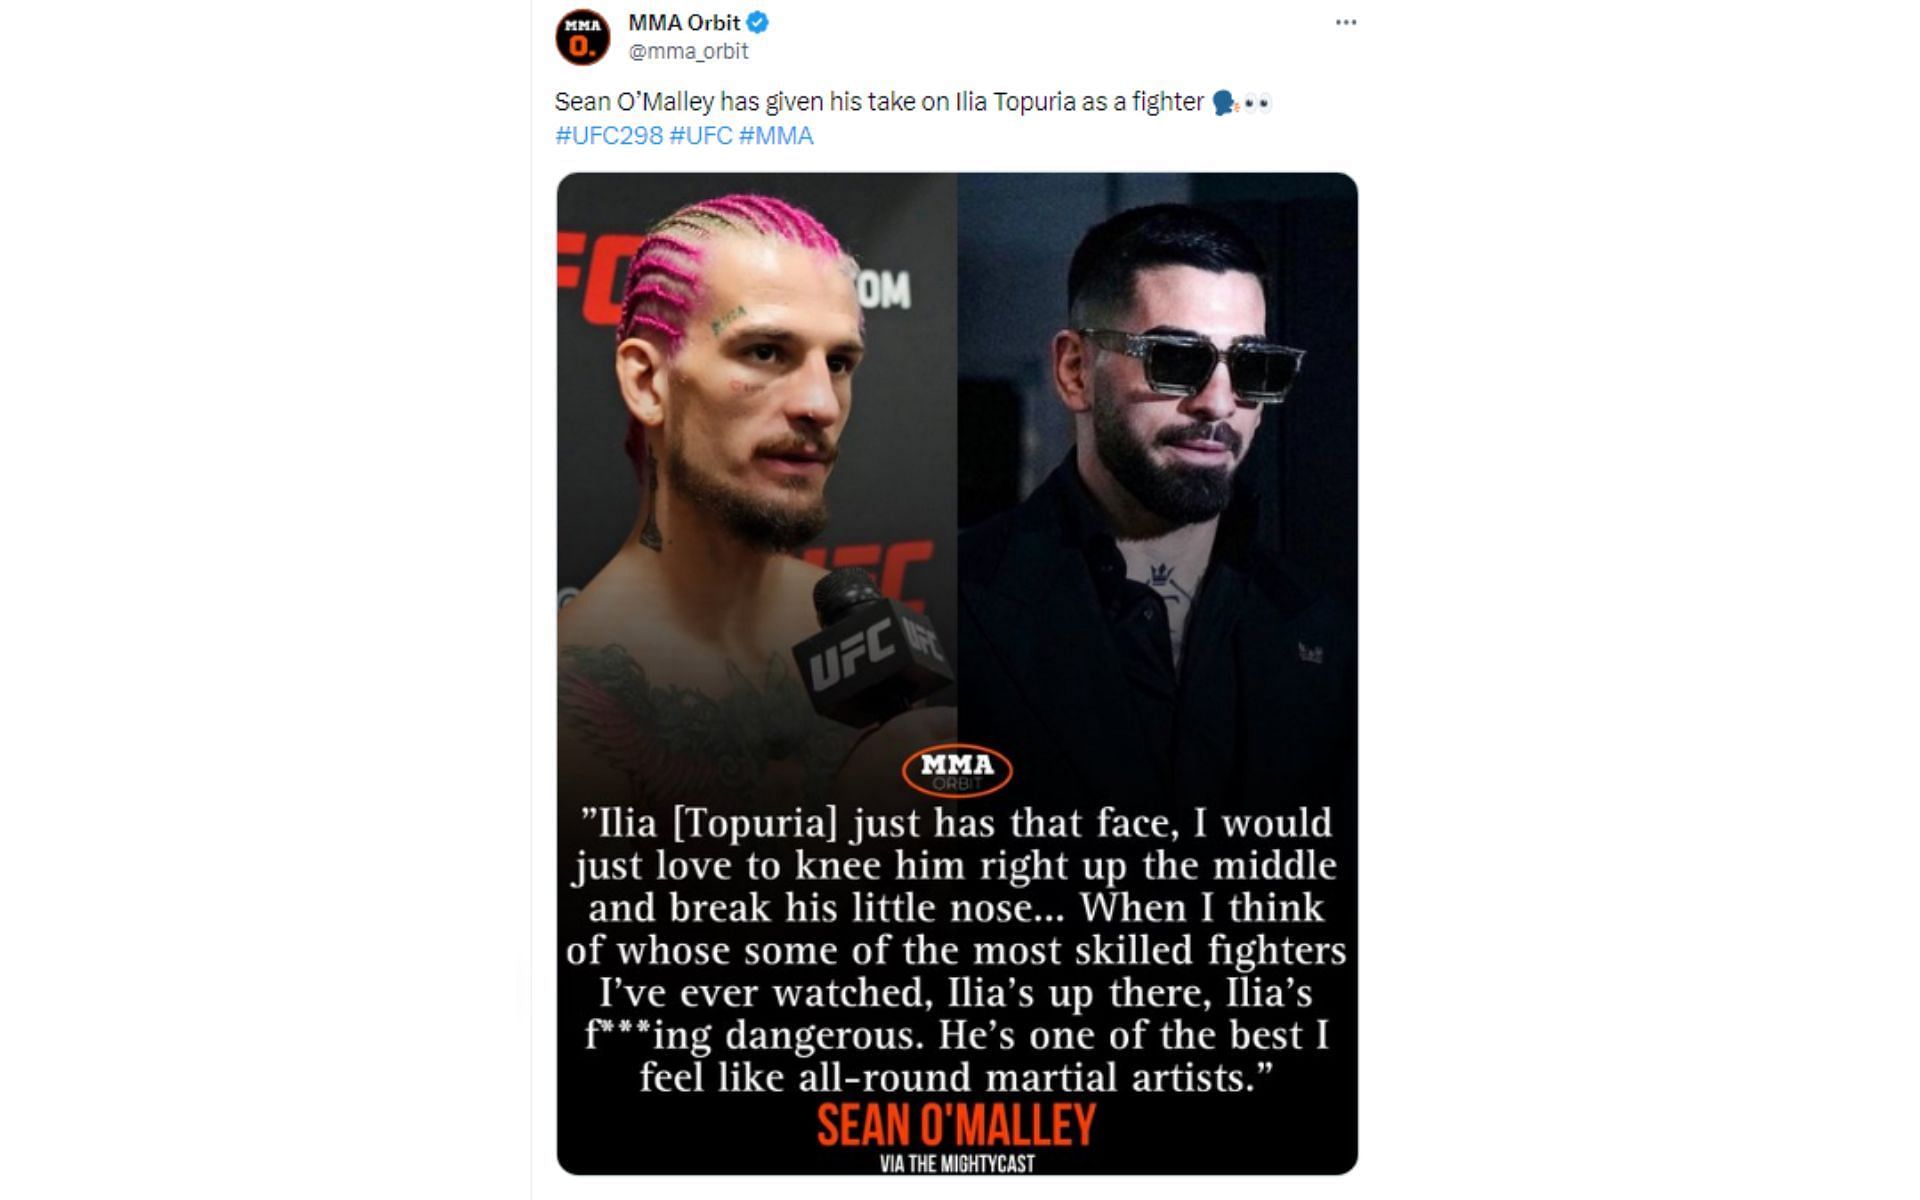 Tweet regarding Sean O&#039;Malley&#039;s comments about Topuria [Image courtesy: @mma_orbit - X]